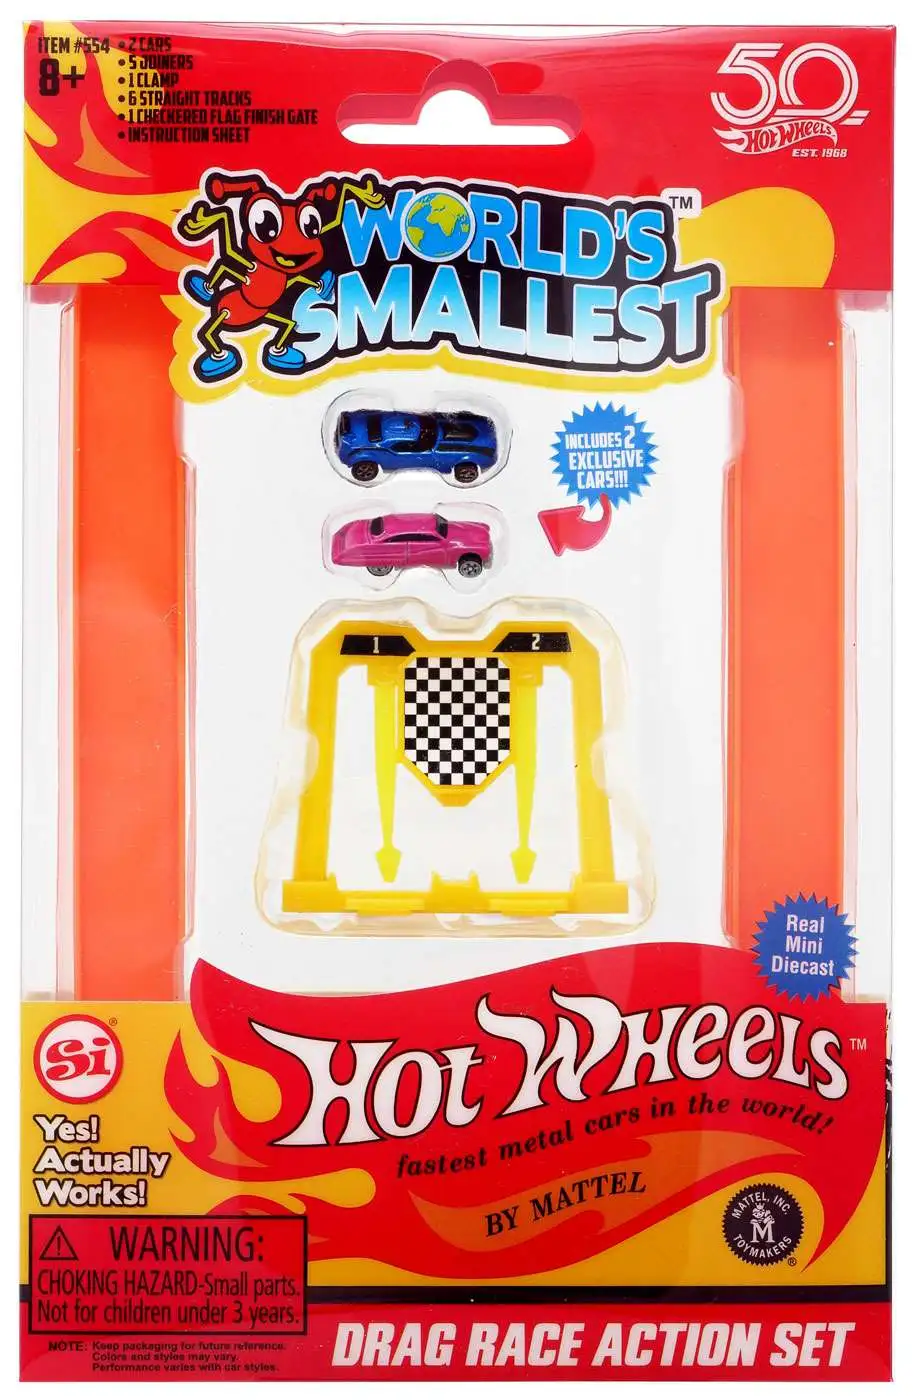 D-Muscle Twinduction Turbofire World's Smallest Hot Wheels Series 4 Set of 3 